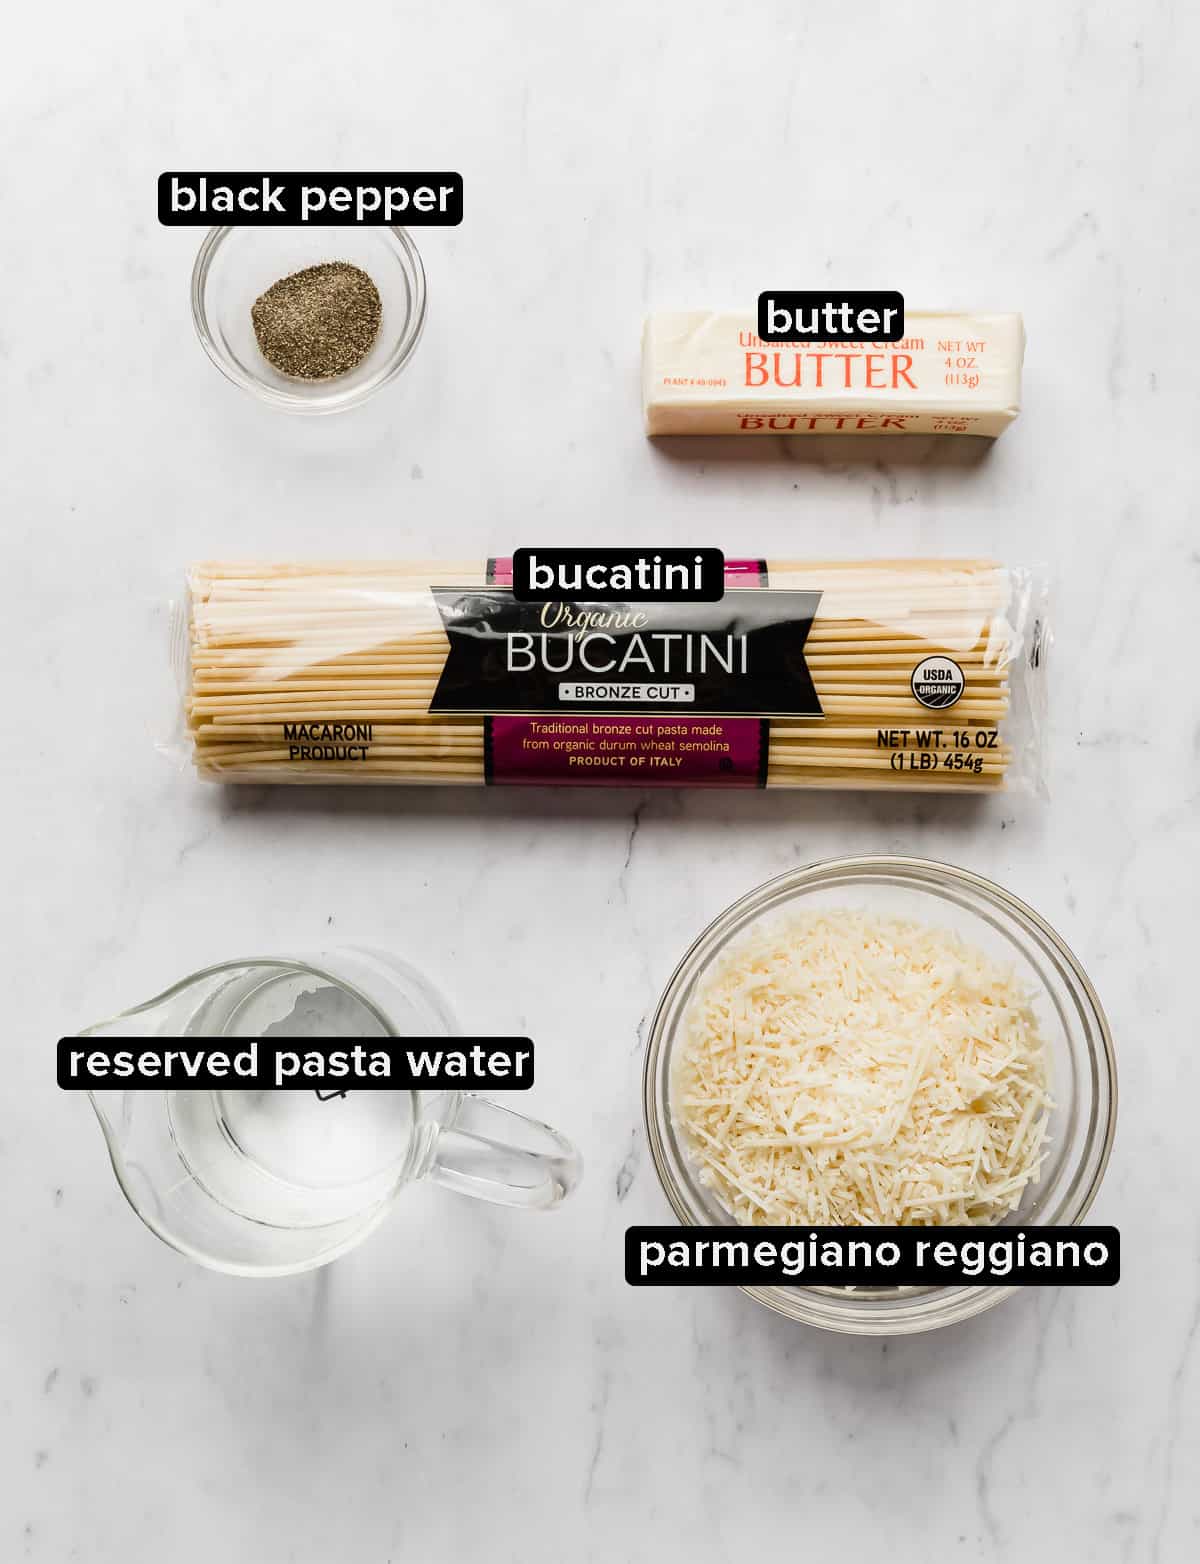 Bucatini Cacio e Pepe ingredients laying on a white background.